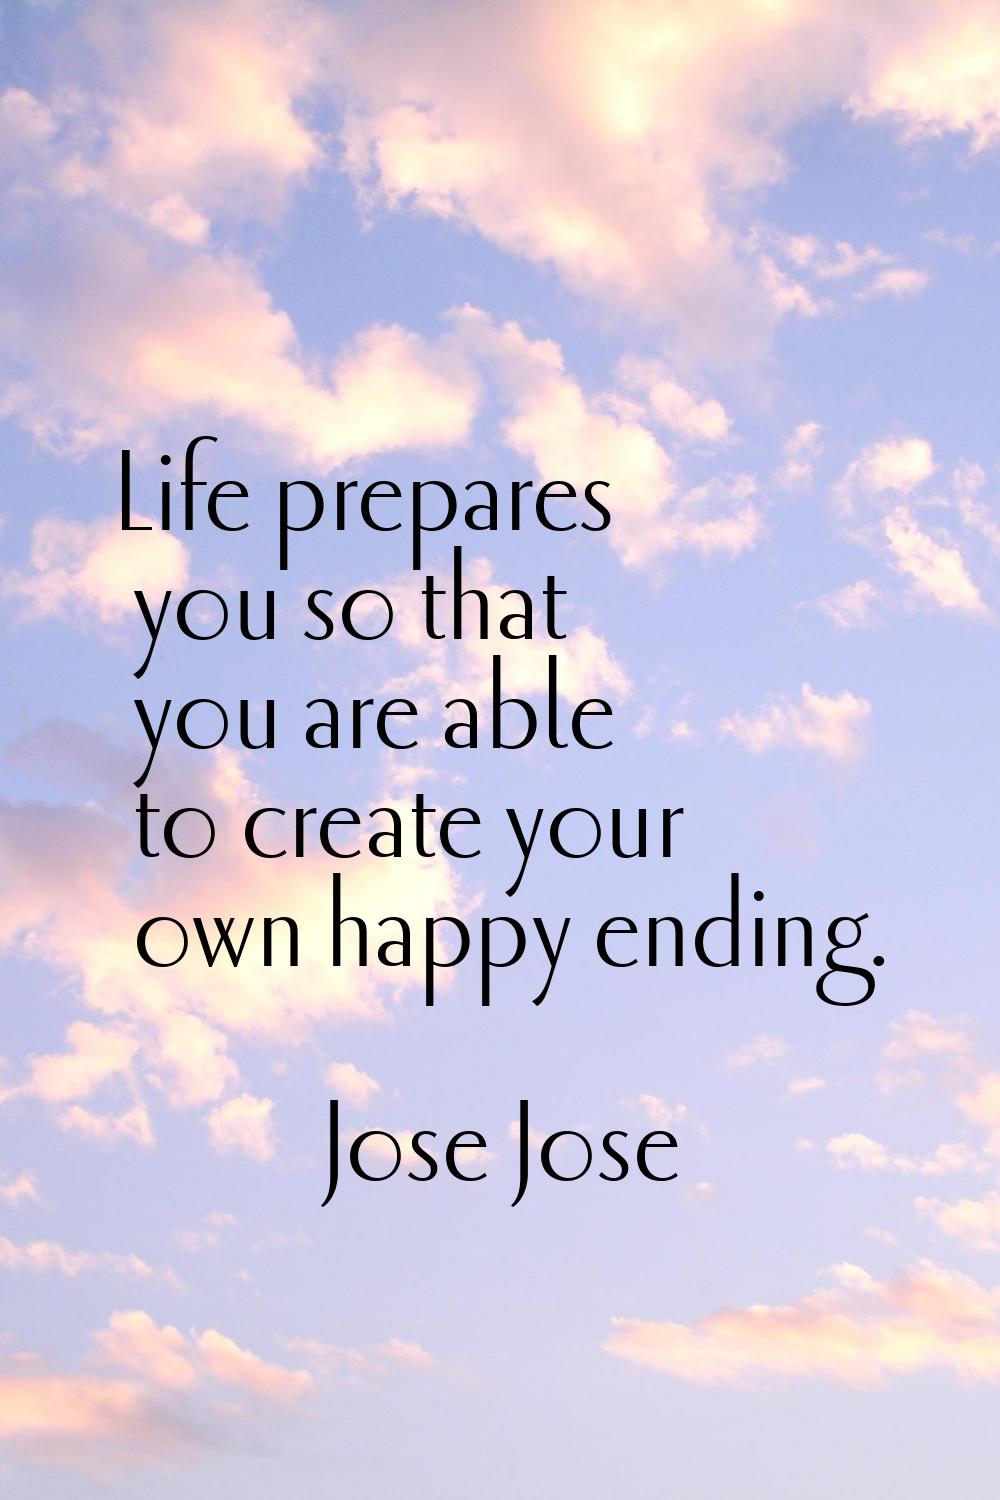 Life prepares you so that you are able to create your own happy ending.